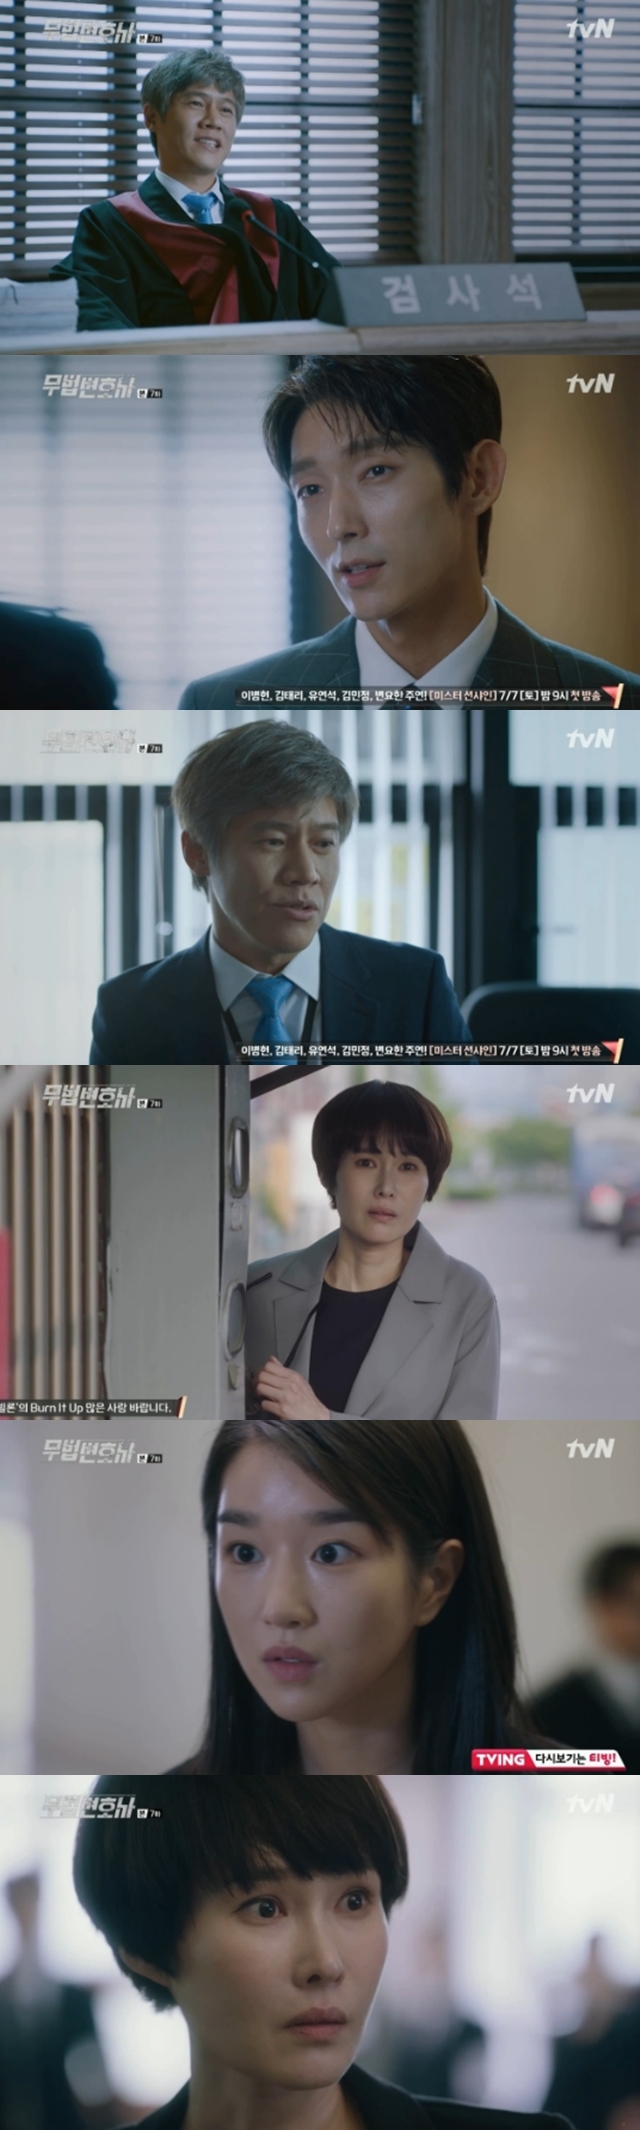 Bong Sang-pil, Lee Joon-gis assistant, and Baek Joo-hee, the mother of Seo Ye-ji, appeared in earnest. With their appearance, the second act of lawless lawyer was held.In the 7th episode of TVNs new weekend Drama Legal Counselor (playplayed by Yoon Hyun-ho/director Kim Jin-min/production studio Dragon Rogosfilm), which aired on June 2, Chun Seung-beom (Park Ho-san) becomes assistant to Bong Sang-pil (Lee Joon-gi), and Noh Hyun-joo (played by Seo Ye-ji) ) and face to face.On the day of the broadcast, Woo Hyung-man (Lee Dae-yeon), who was released by Bong Sang-pil, handed over the data he had collected to Bong Sang-pil and Ha Jae-yi.So Bong Sang-pil and Ha Jae-yi got a chance to catch up with Ahn Joo-ju and Cha Moon-sook a little more.Bong went to the prosecutor who had sent him to prison in the past, and then arrested the bank manager who had decided to take charge of the Oju group instead of Ahn Oju, who became the mayor.Chun Seung-bum came down to his persuasion, saying to Bong Sang-pil, You are a gangster who knows a little law.Ha Jae-yis mother, Roh Hyun-joo, was predicted to cause a great change. He saved his chest thanks to his past friendship, and he was forced to leave his life.He then entered the airport and secretly hid and watched Ha Jae-yi and his father (Lee Han-wi).At the end of the broadcast, Noh Hyun-joo, who came to the funeral hall of Woo Hyung-man, was confronted by his daughter Ha Jae-yi.Ha Jae-yi did not recognize his mother, and Roh Hyun-joo was embarrassed by the sudden meeting with his daughter.kim ye-eun